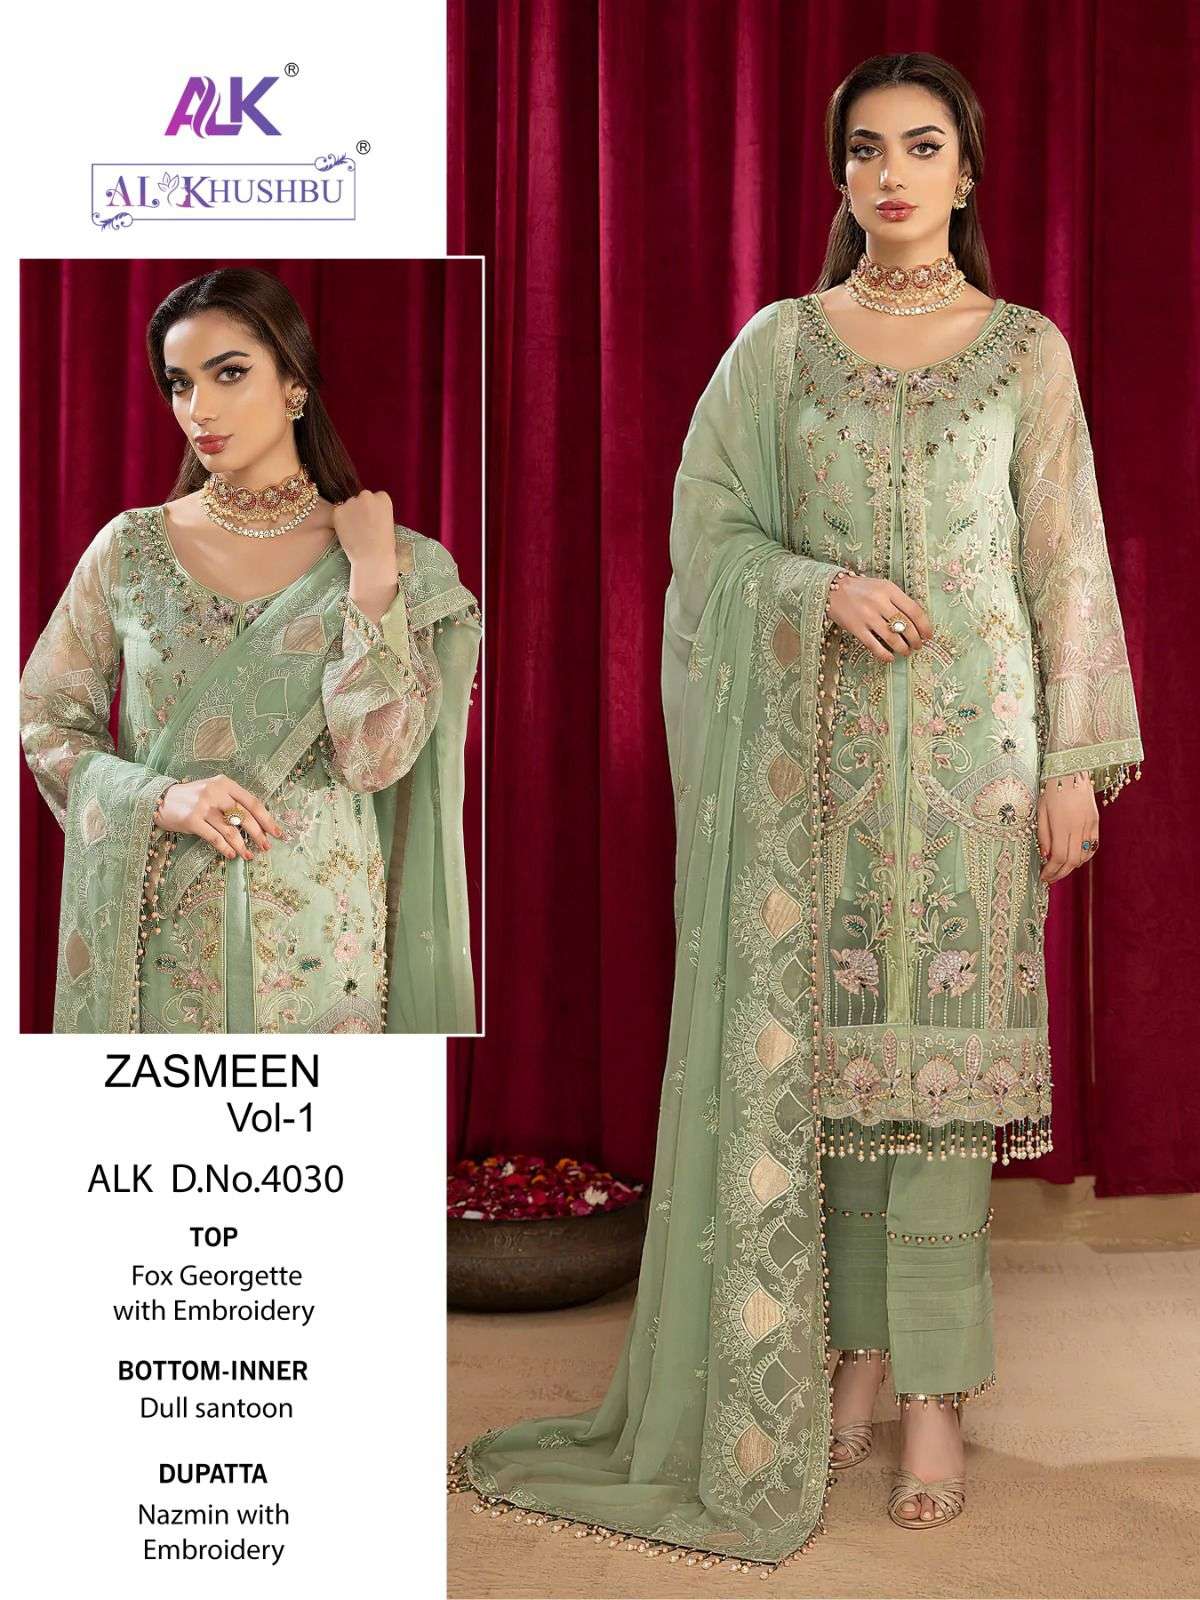 AL KHUSHBU ZASMEEN VOL 1 GEORGETTE EMBROIDERED SUITS AT WHOL...